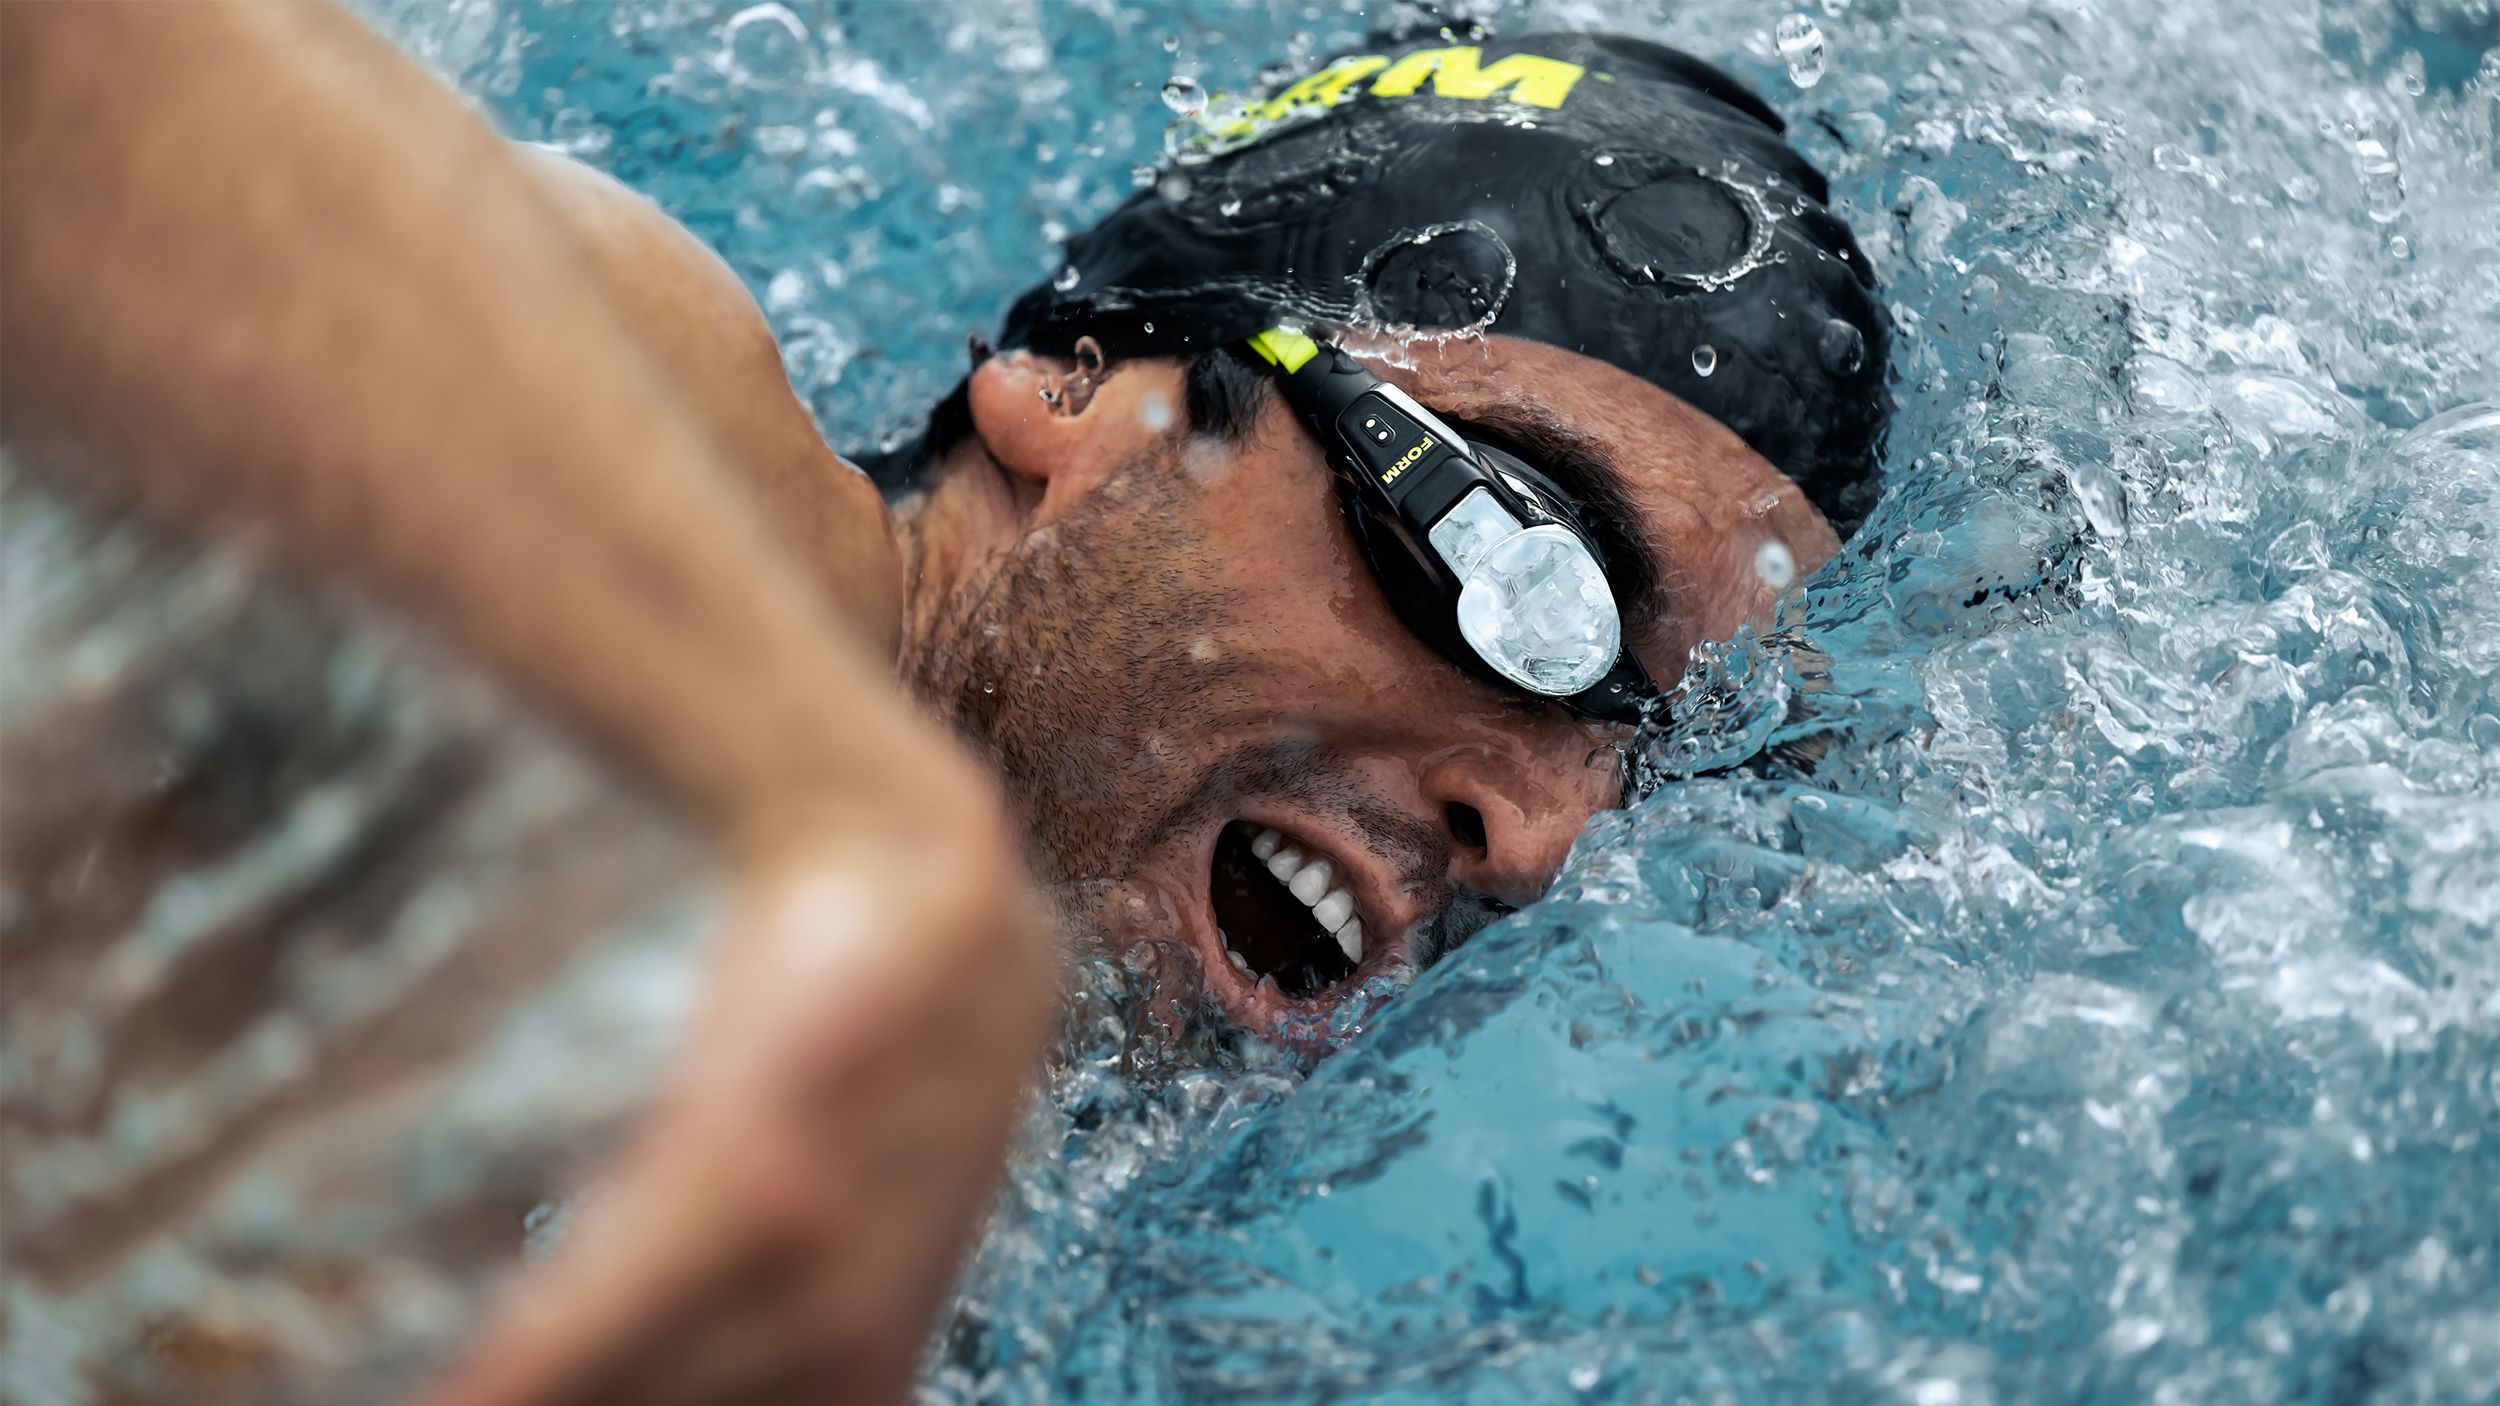 A person swims with the Smart Swim 2 Goggles on.